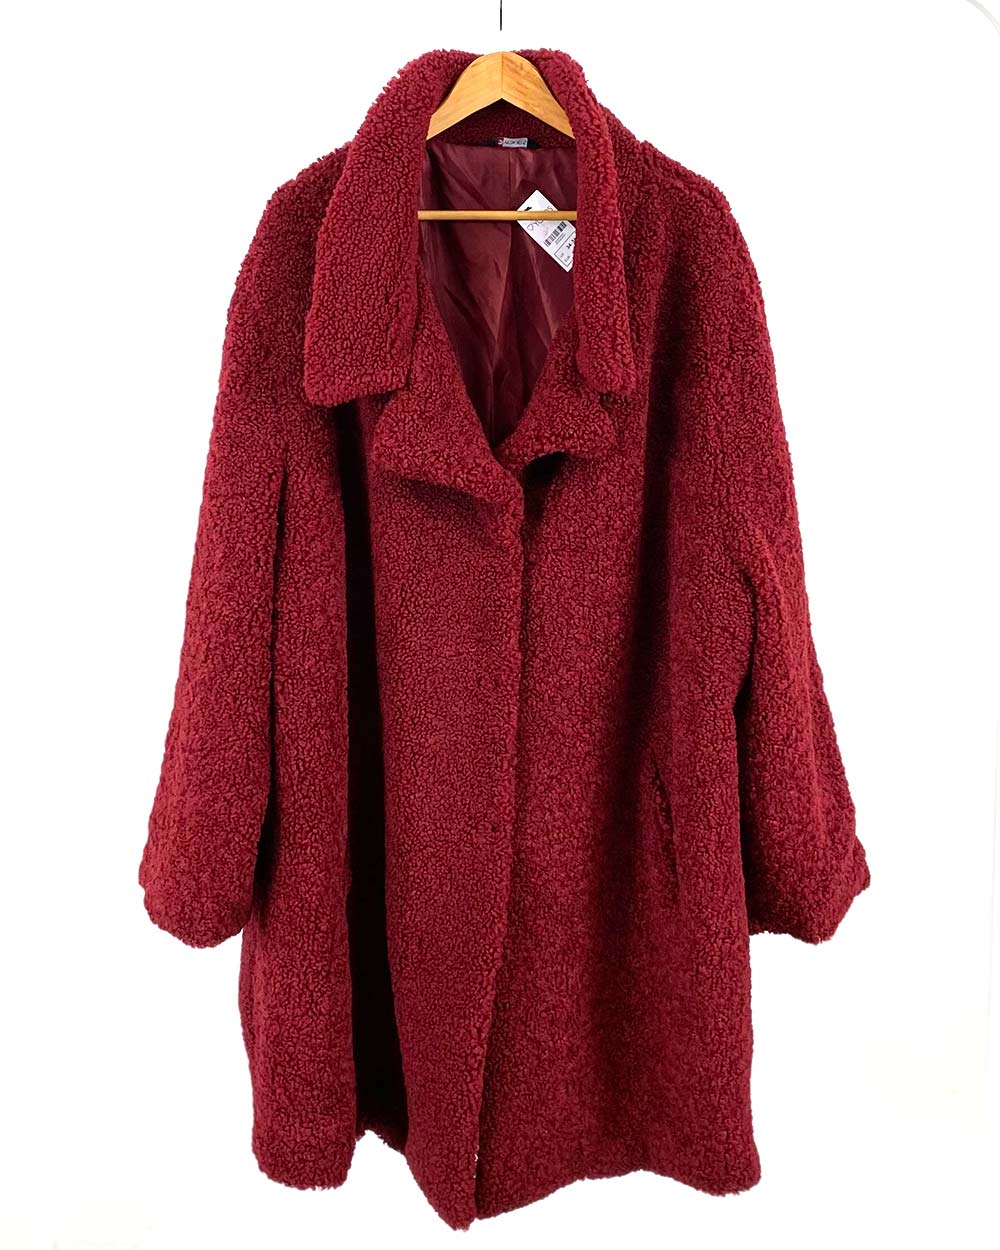 Yours Clothing Red Teddy Bear Coat UK 34-36